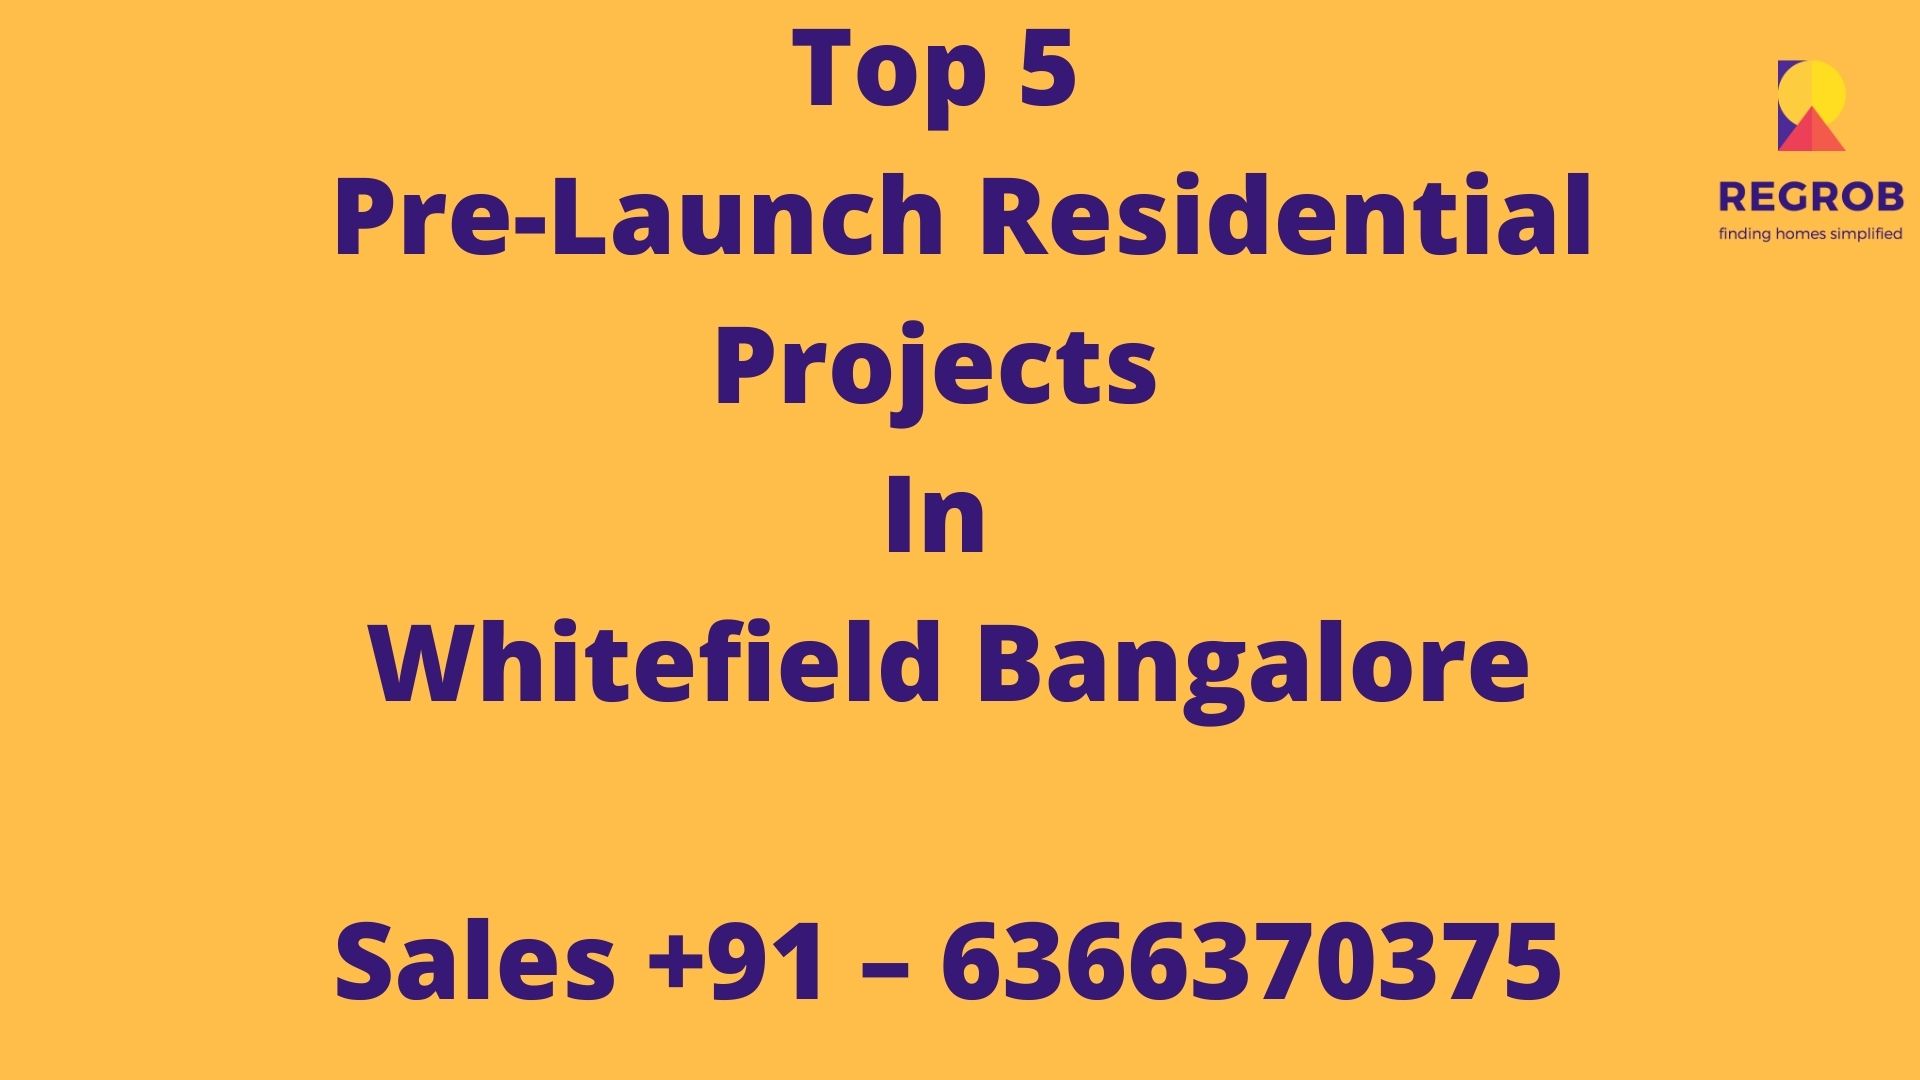 Top 5 Pre-launch Residential Projects in Bangalore